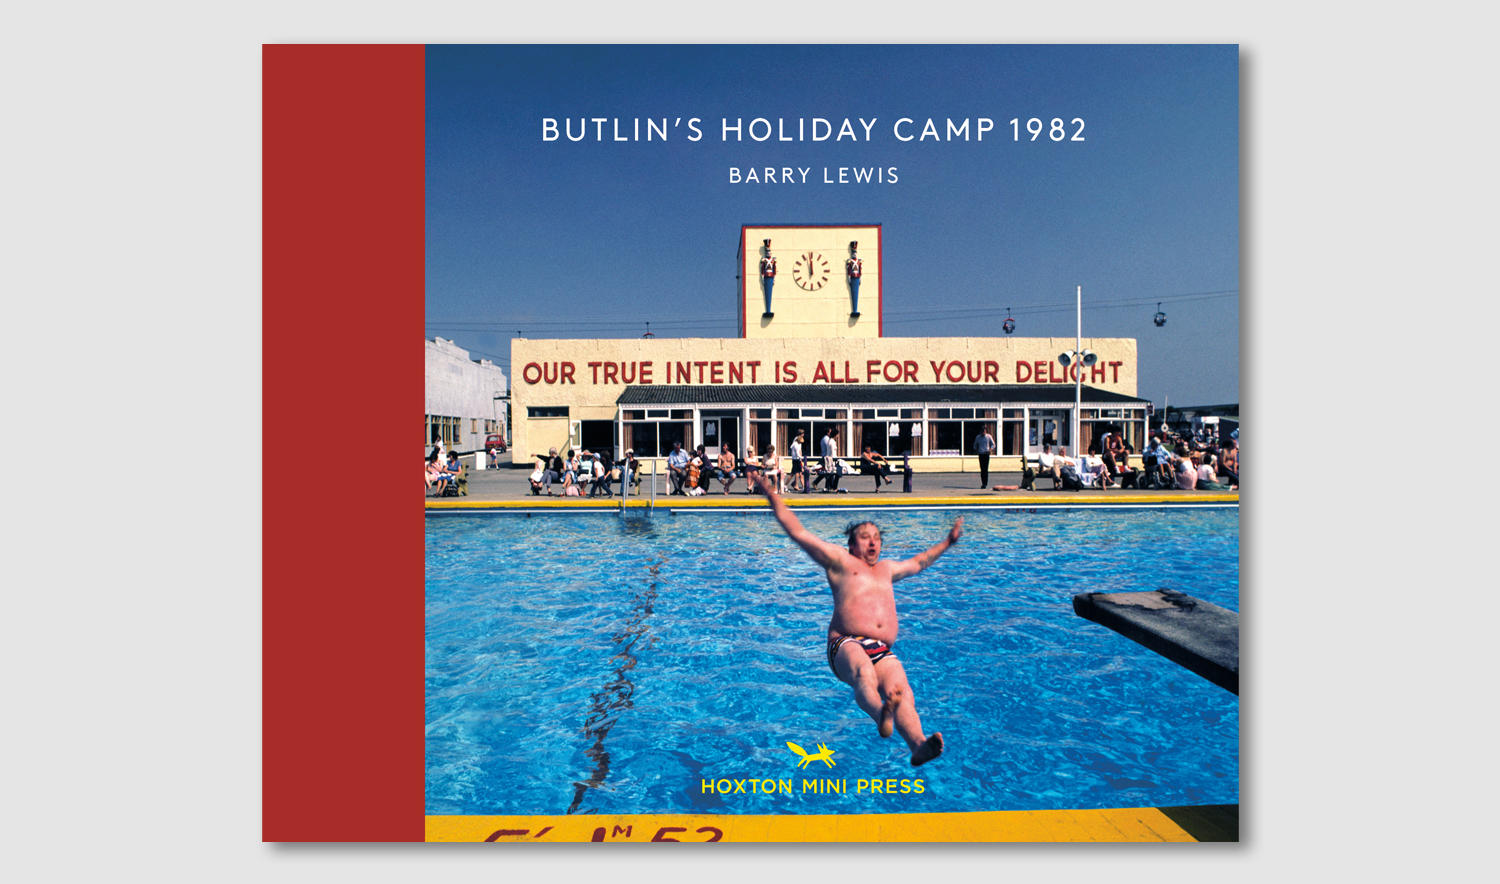 Barry Lewis - Butlin's Holiday Camp